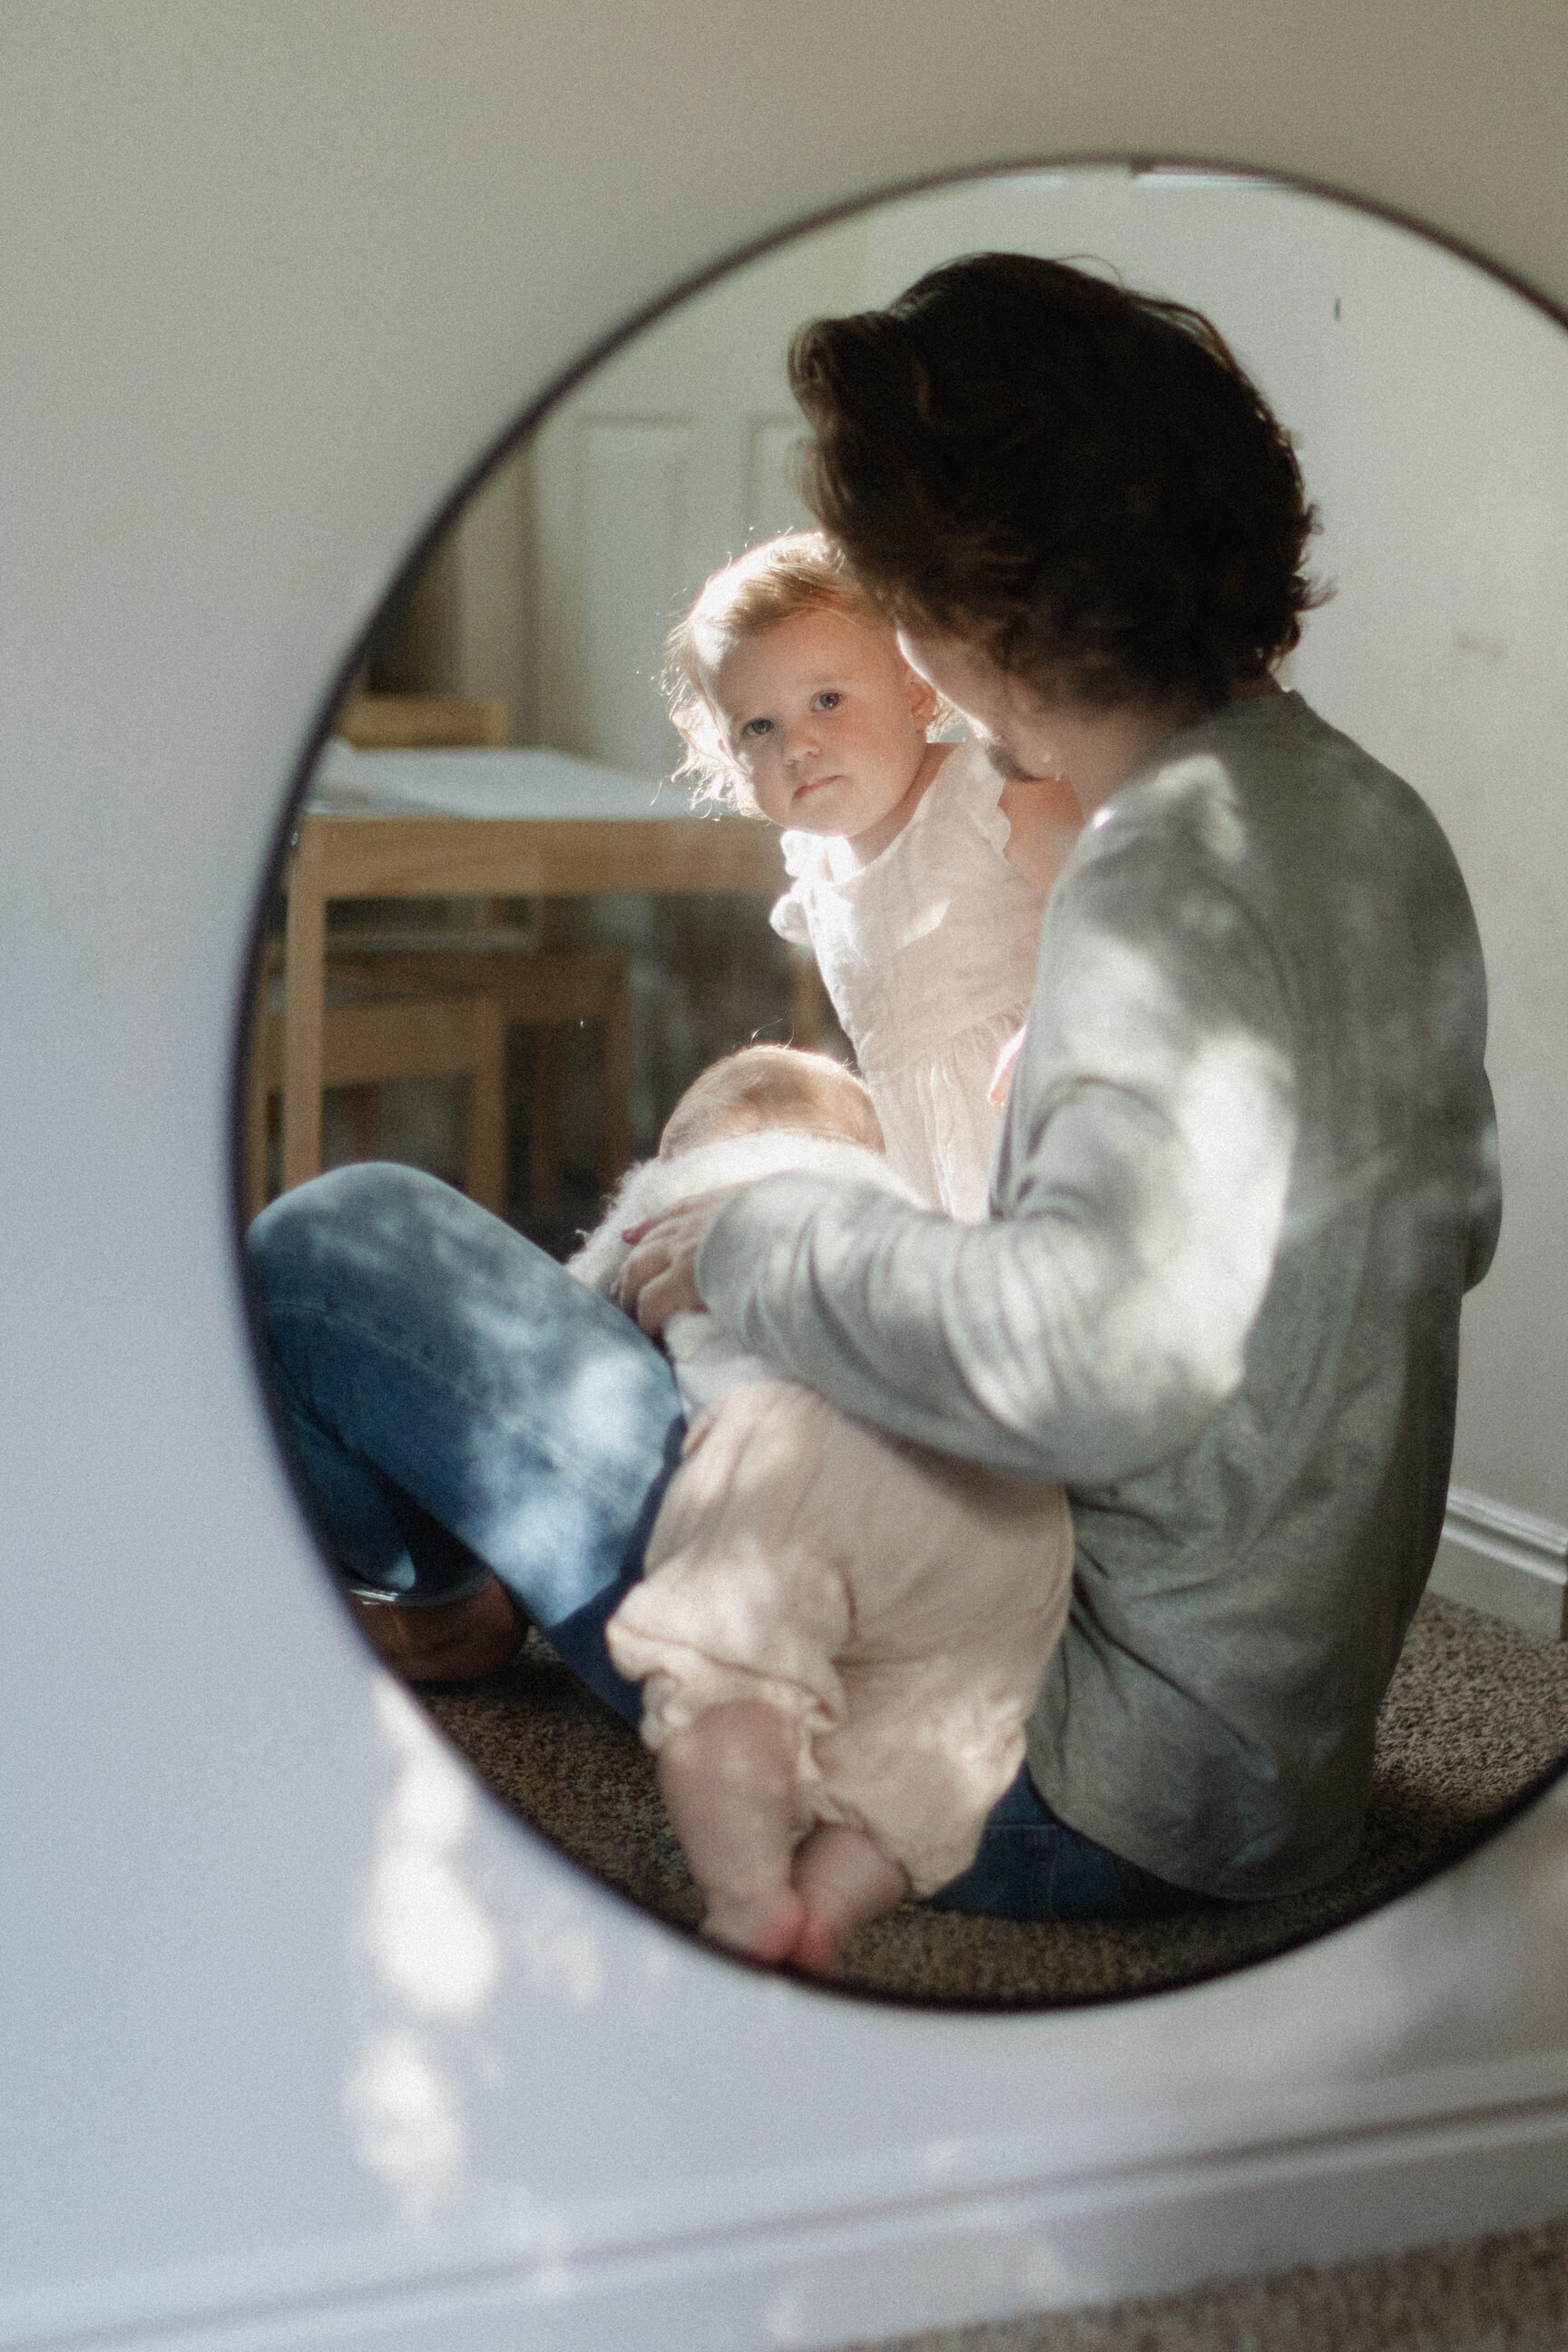 reflection of baby in round mirror